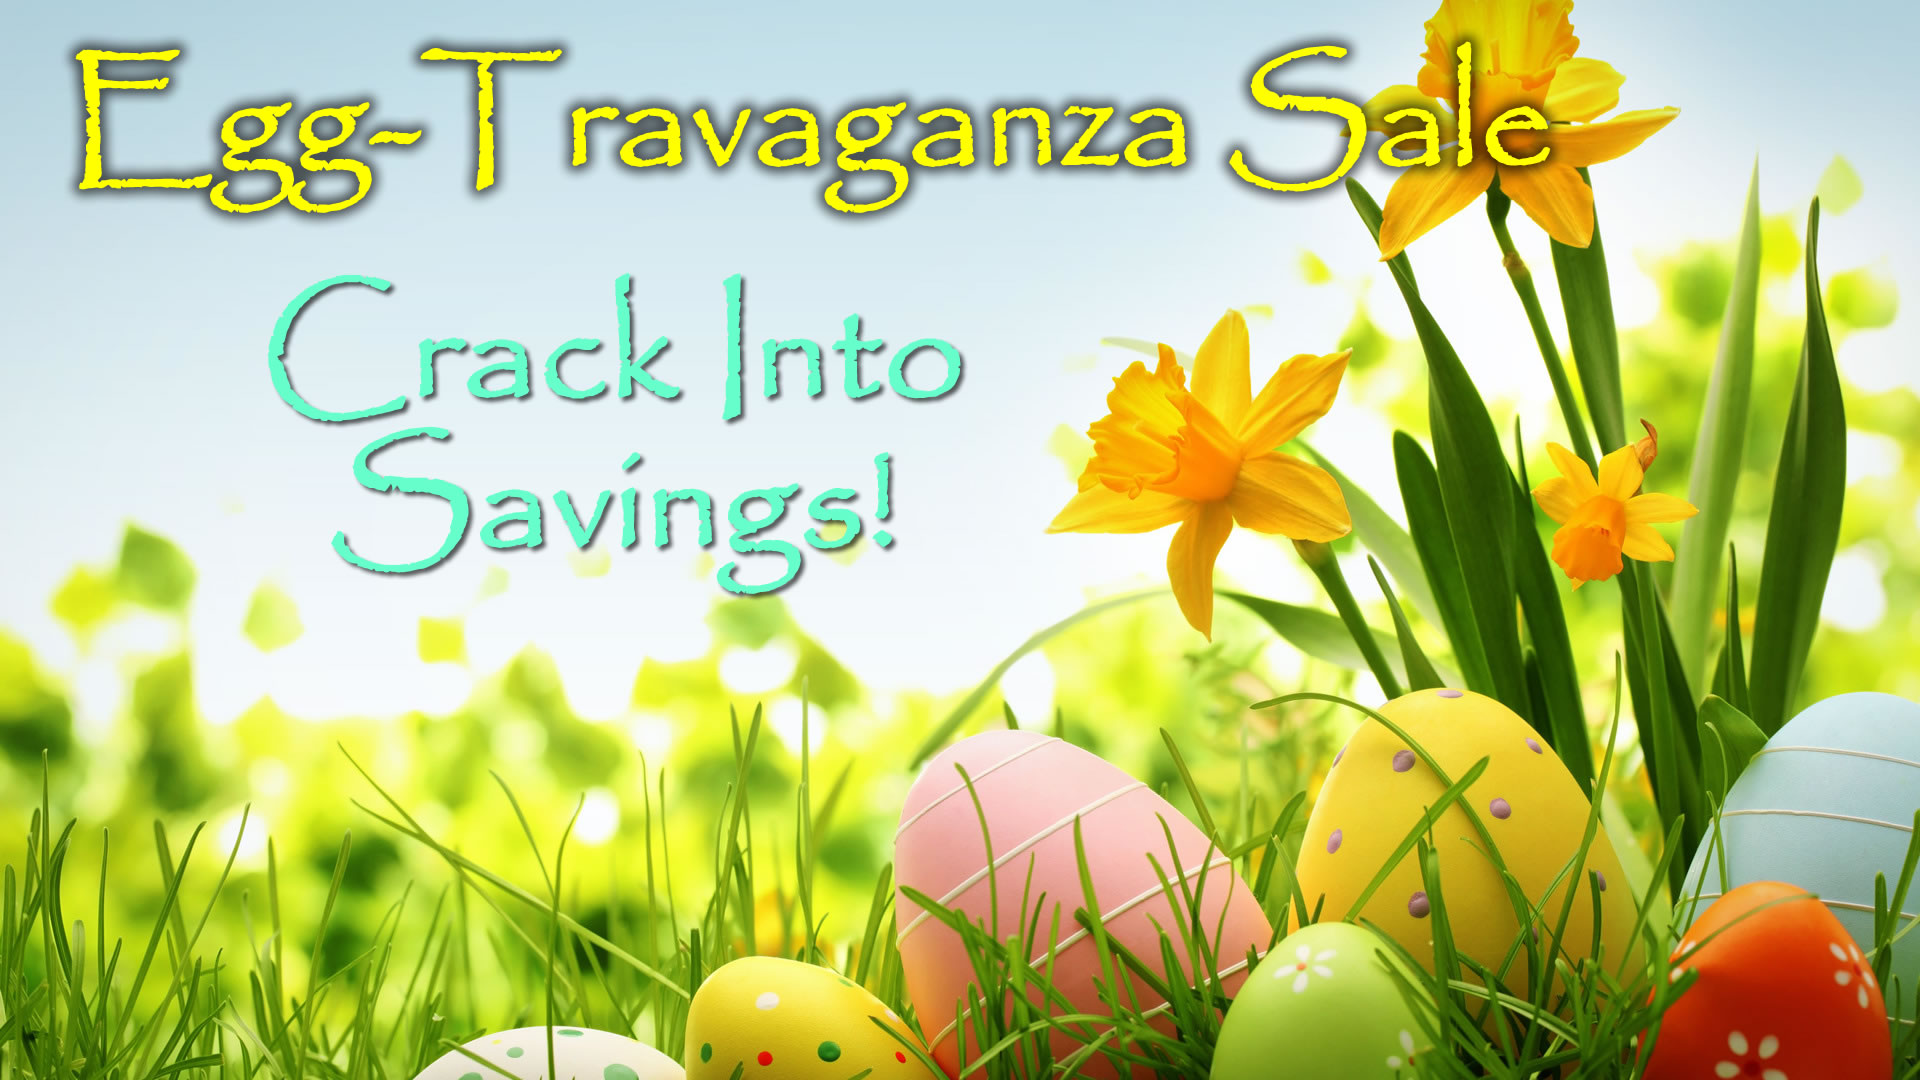 Our 2 Day Easter Egg-Travaganza Sale